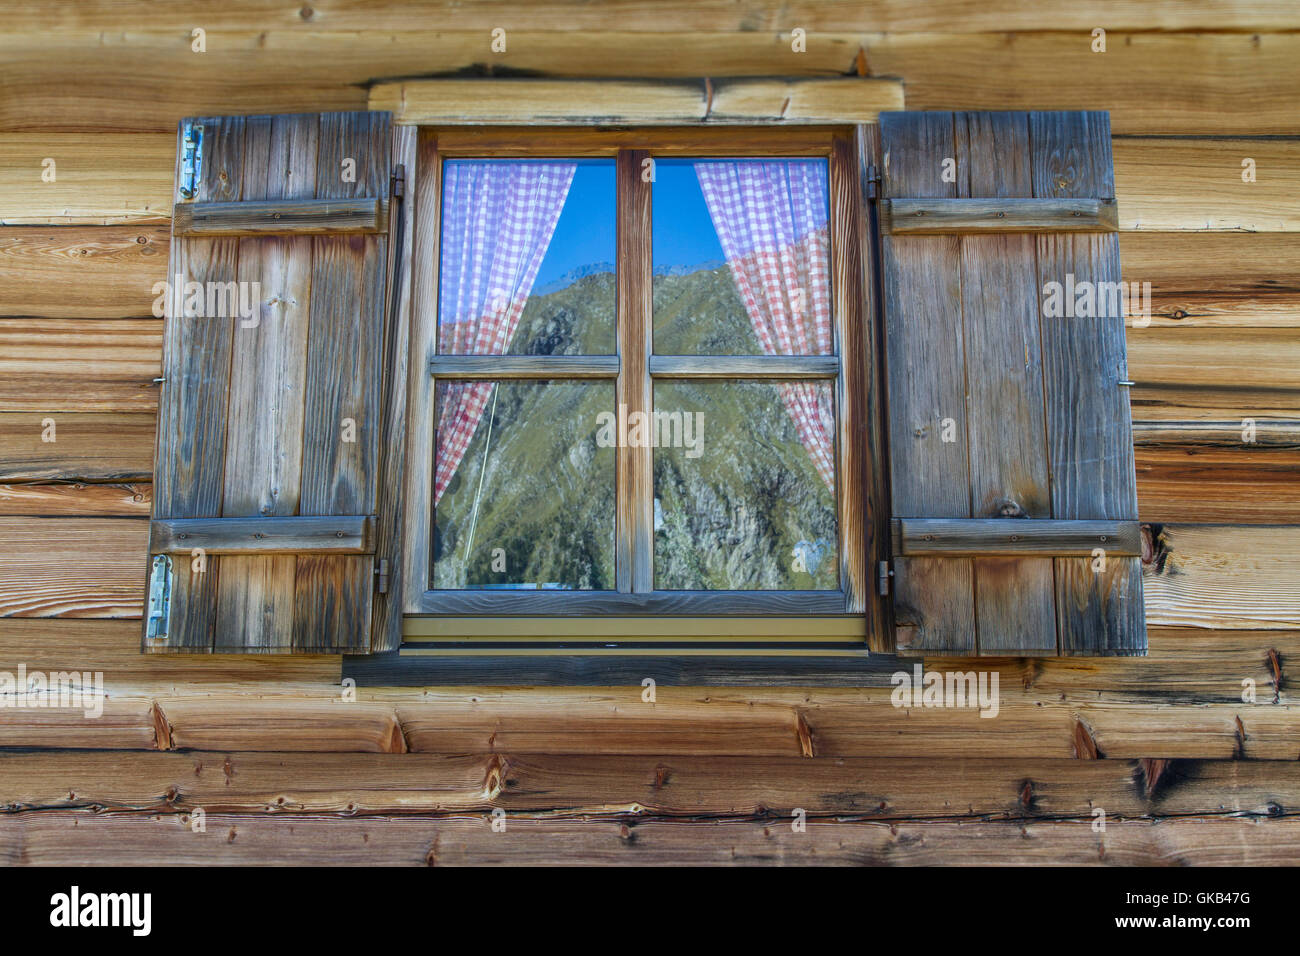 wooden hut with windows in the alps Stock Photo